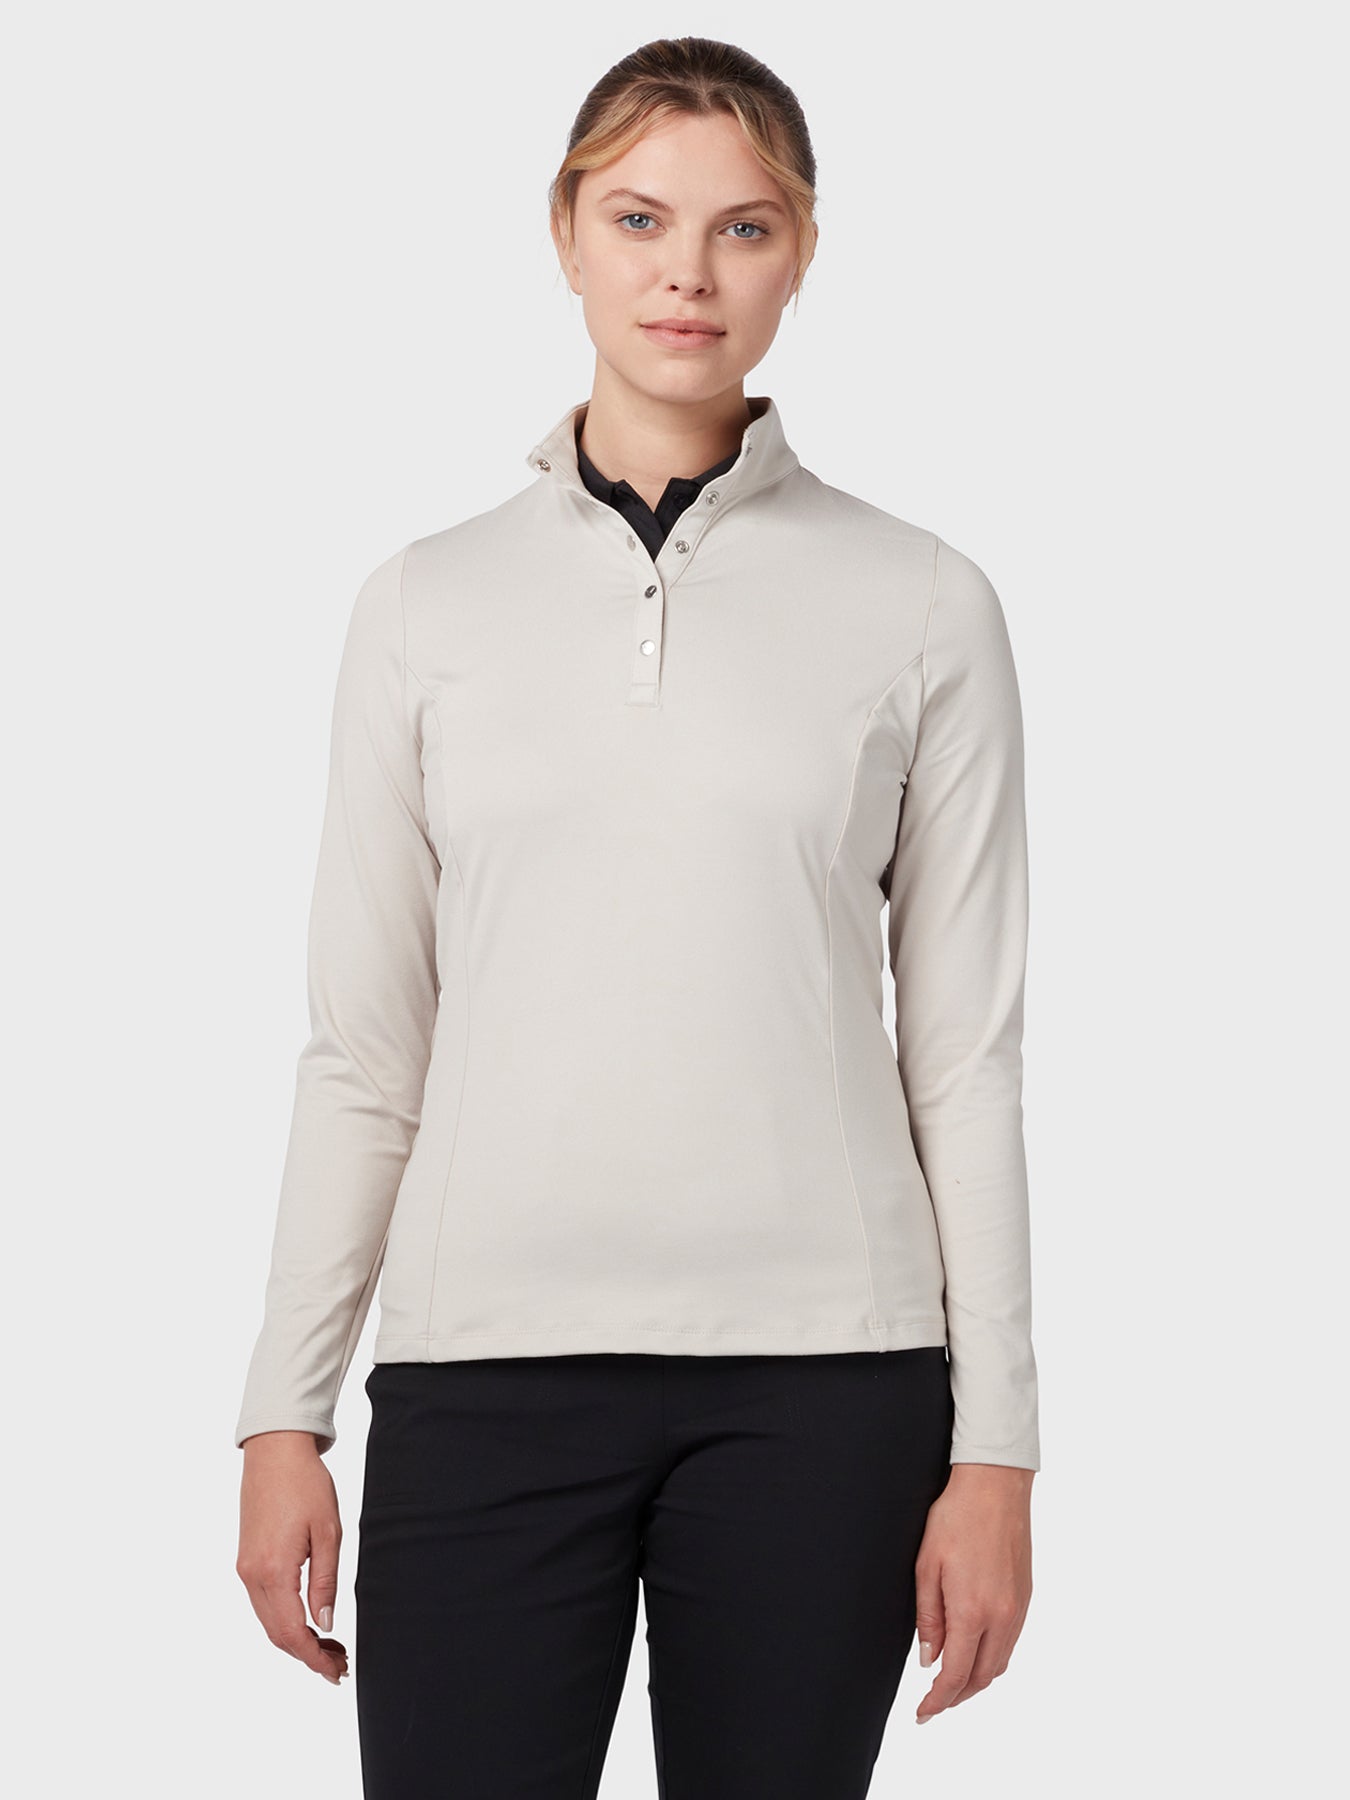 View Womens Thermal Longsleeve Fleece Back Jersey Polo In Chateau Grey Chateau Grey XL information